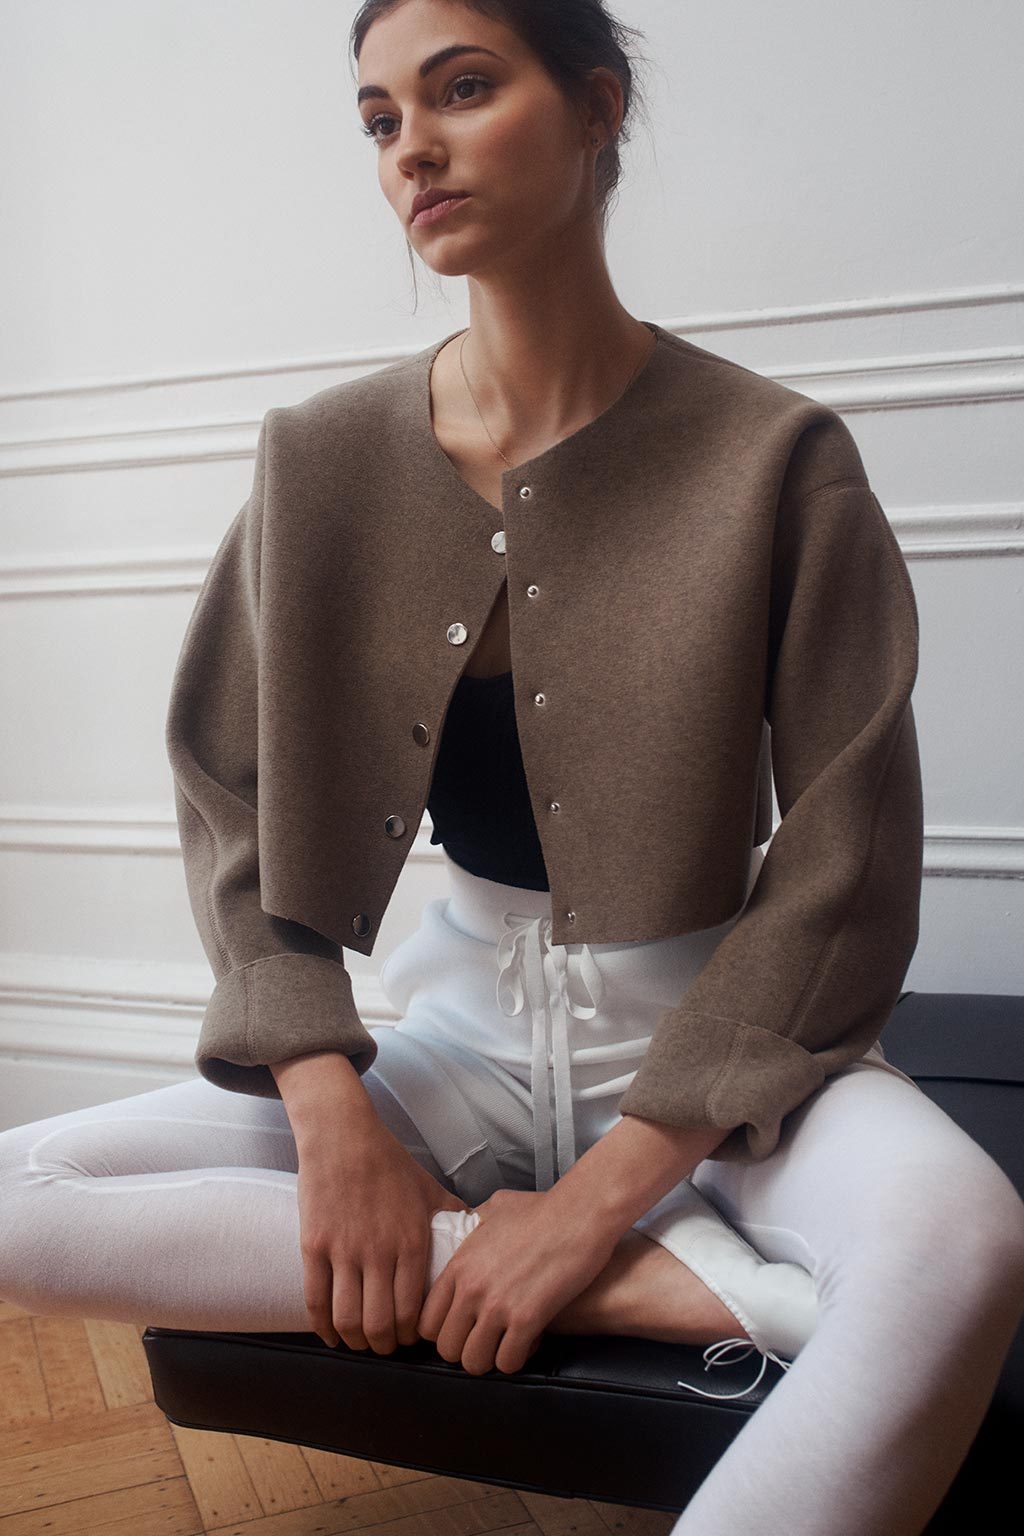 Cult athleisure brands we want to shop right now: LIVE THE PROCESS Raw Cropped Bomber, $258 USD (approx. $370 NZD) Be a cut above in the Raw Cropped Bomber, where geometry meets earthiness. This crisp camel felt jacket will elevate the everyday.